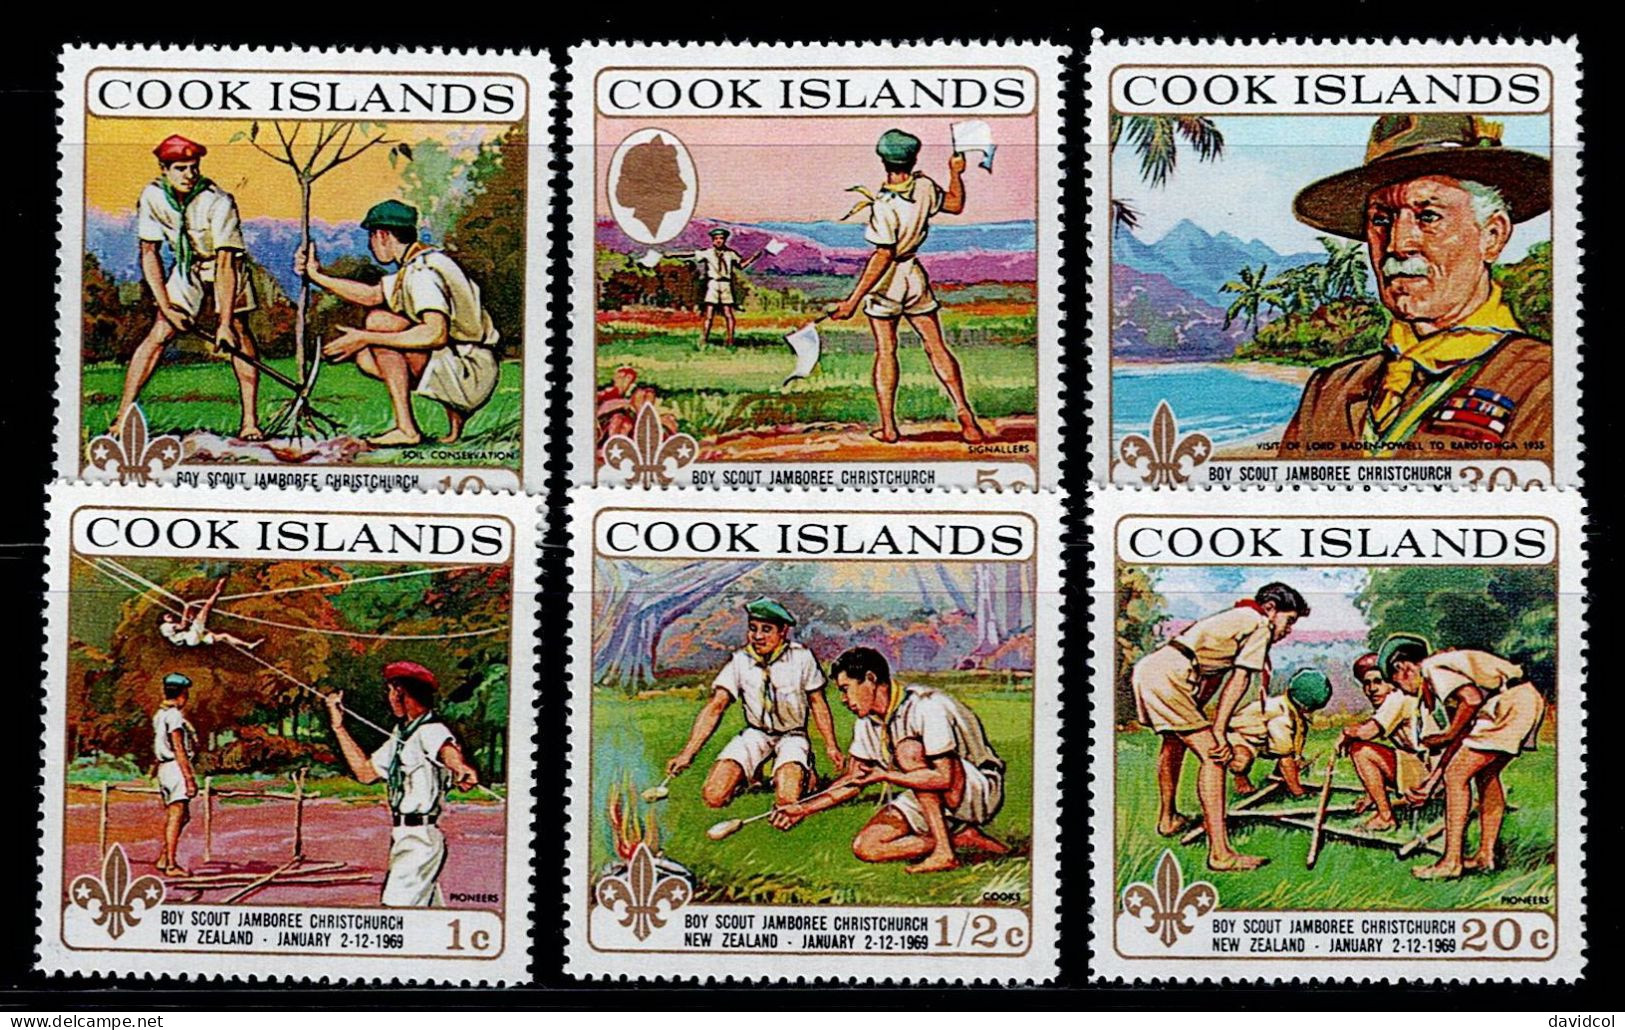 COO-01- COOK ISLANDS - 1969 - MNH -SCOUTS- SCOUT JAMBOREE NEW ZEALAND - Islas Cook